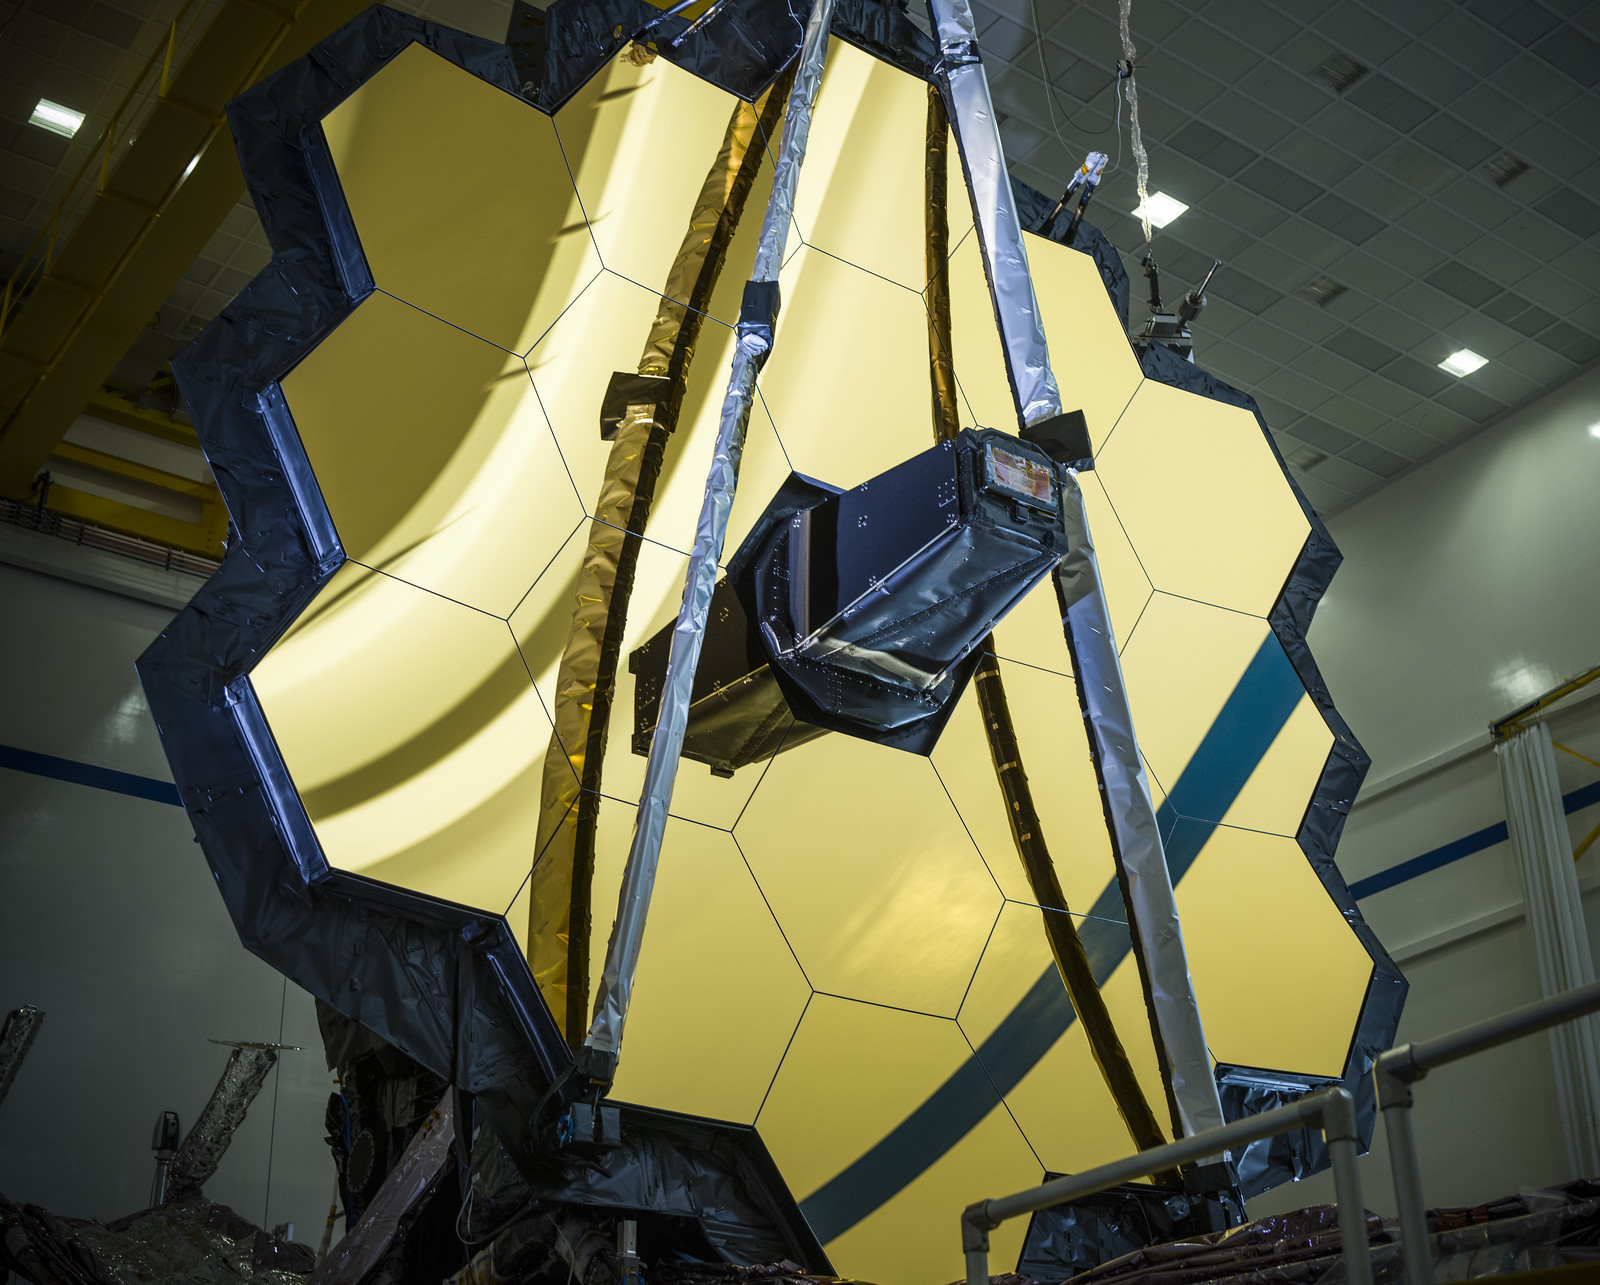 James Webb Telescope: A scientist explains its first images and how it will change astronomy